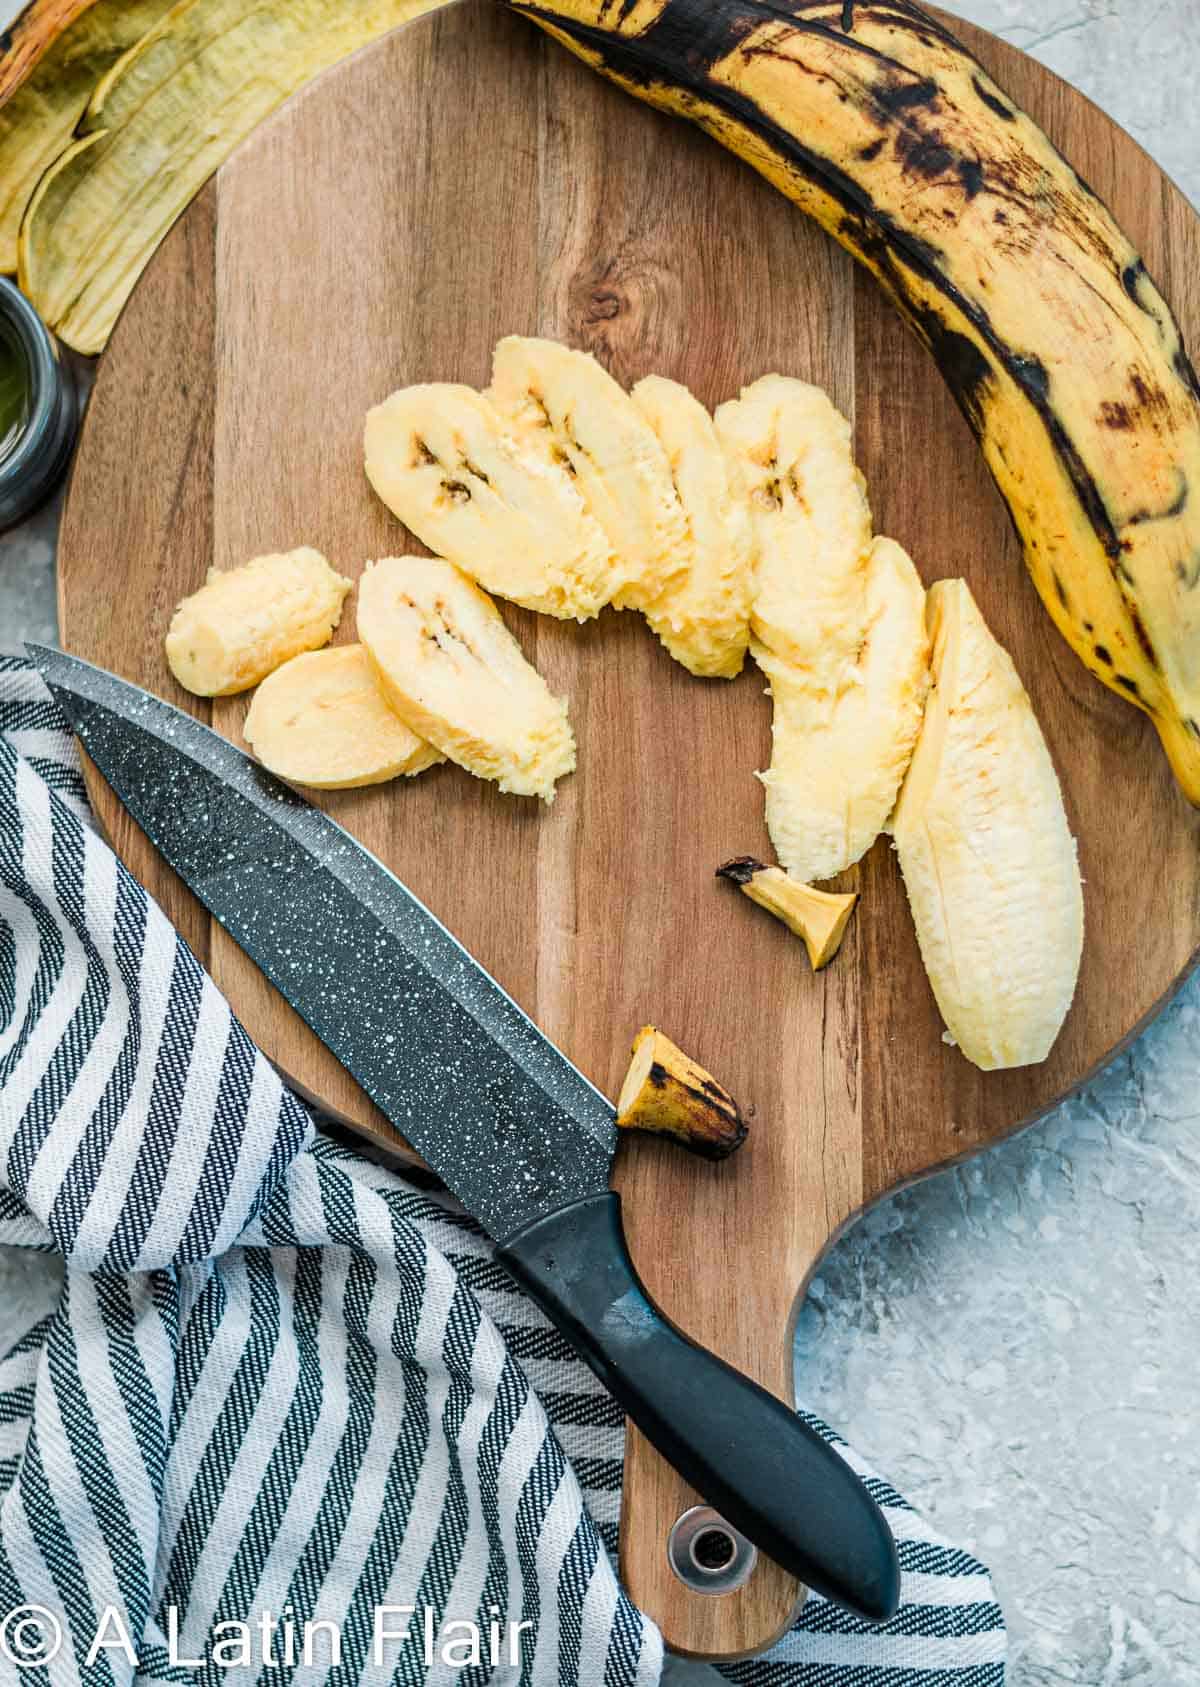 Ripe-yellow-Plantains-with-black-spots-peeled-and-sliced-on-cutting-board